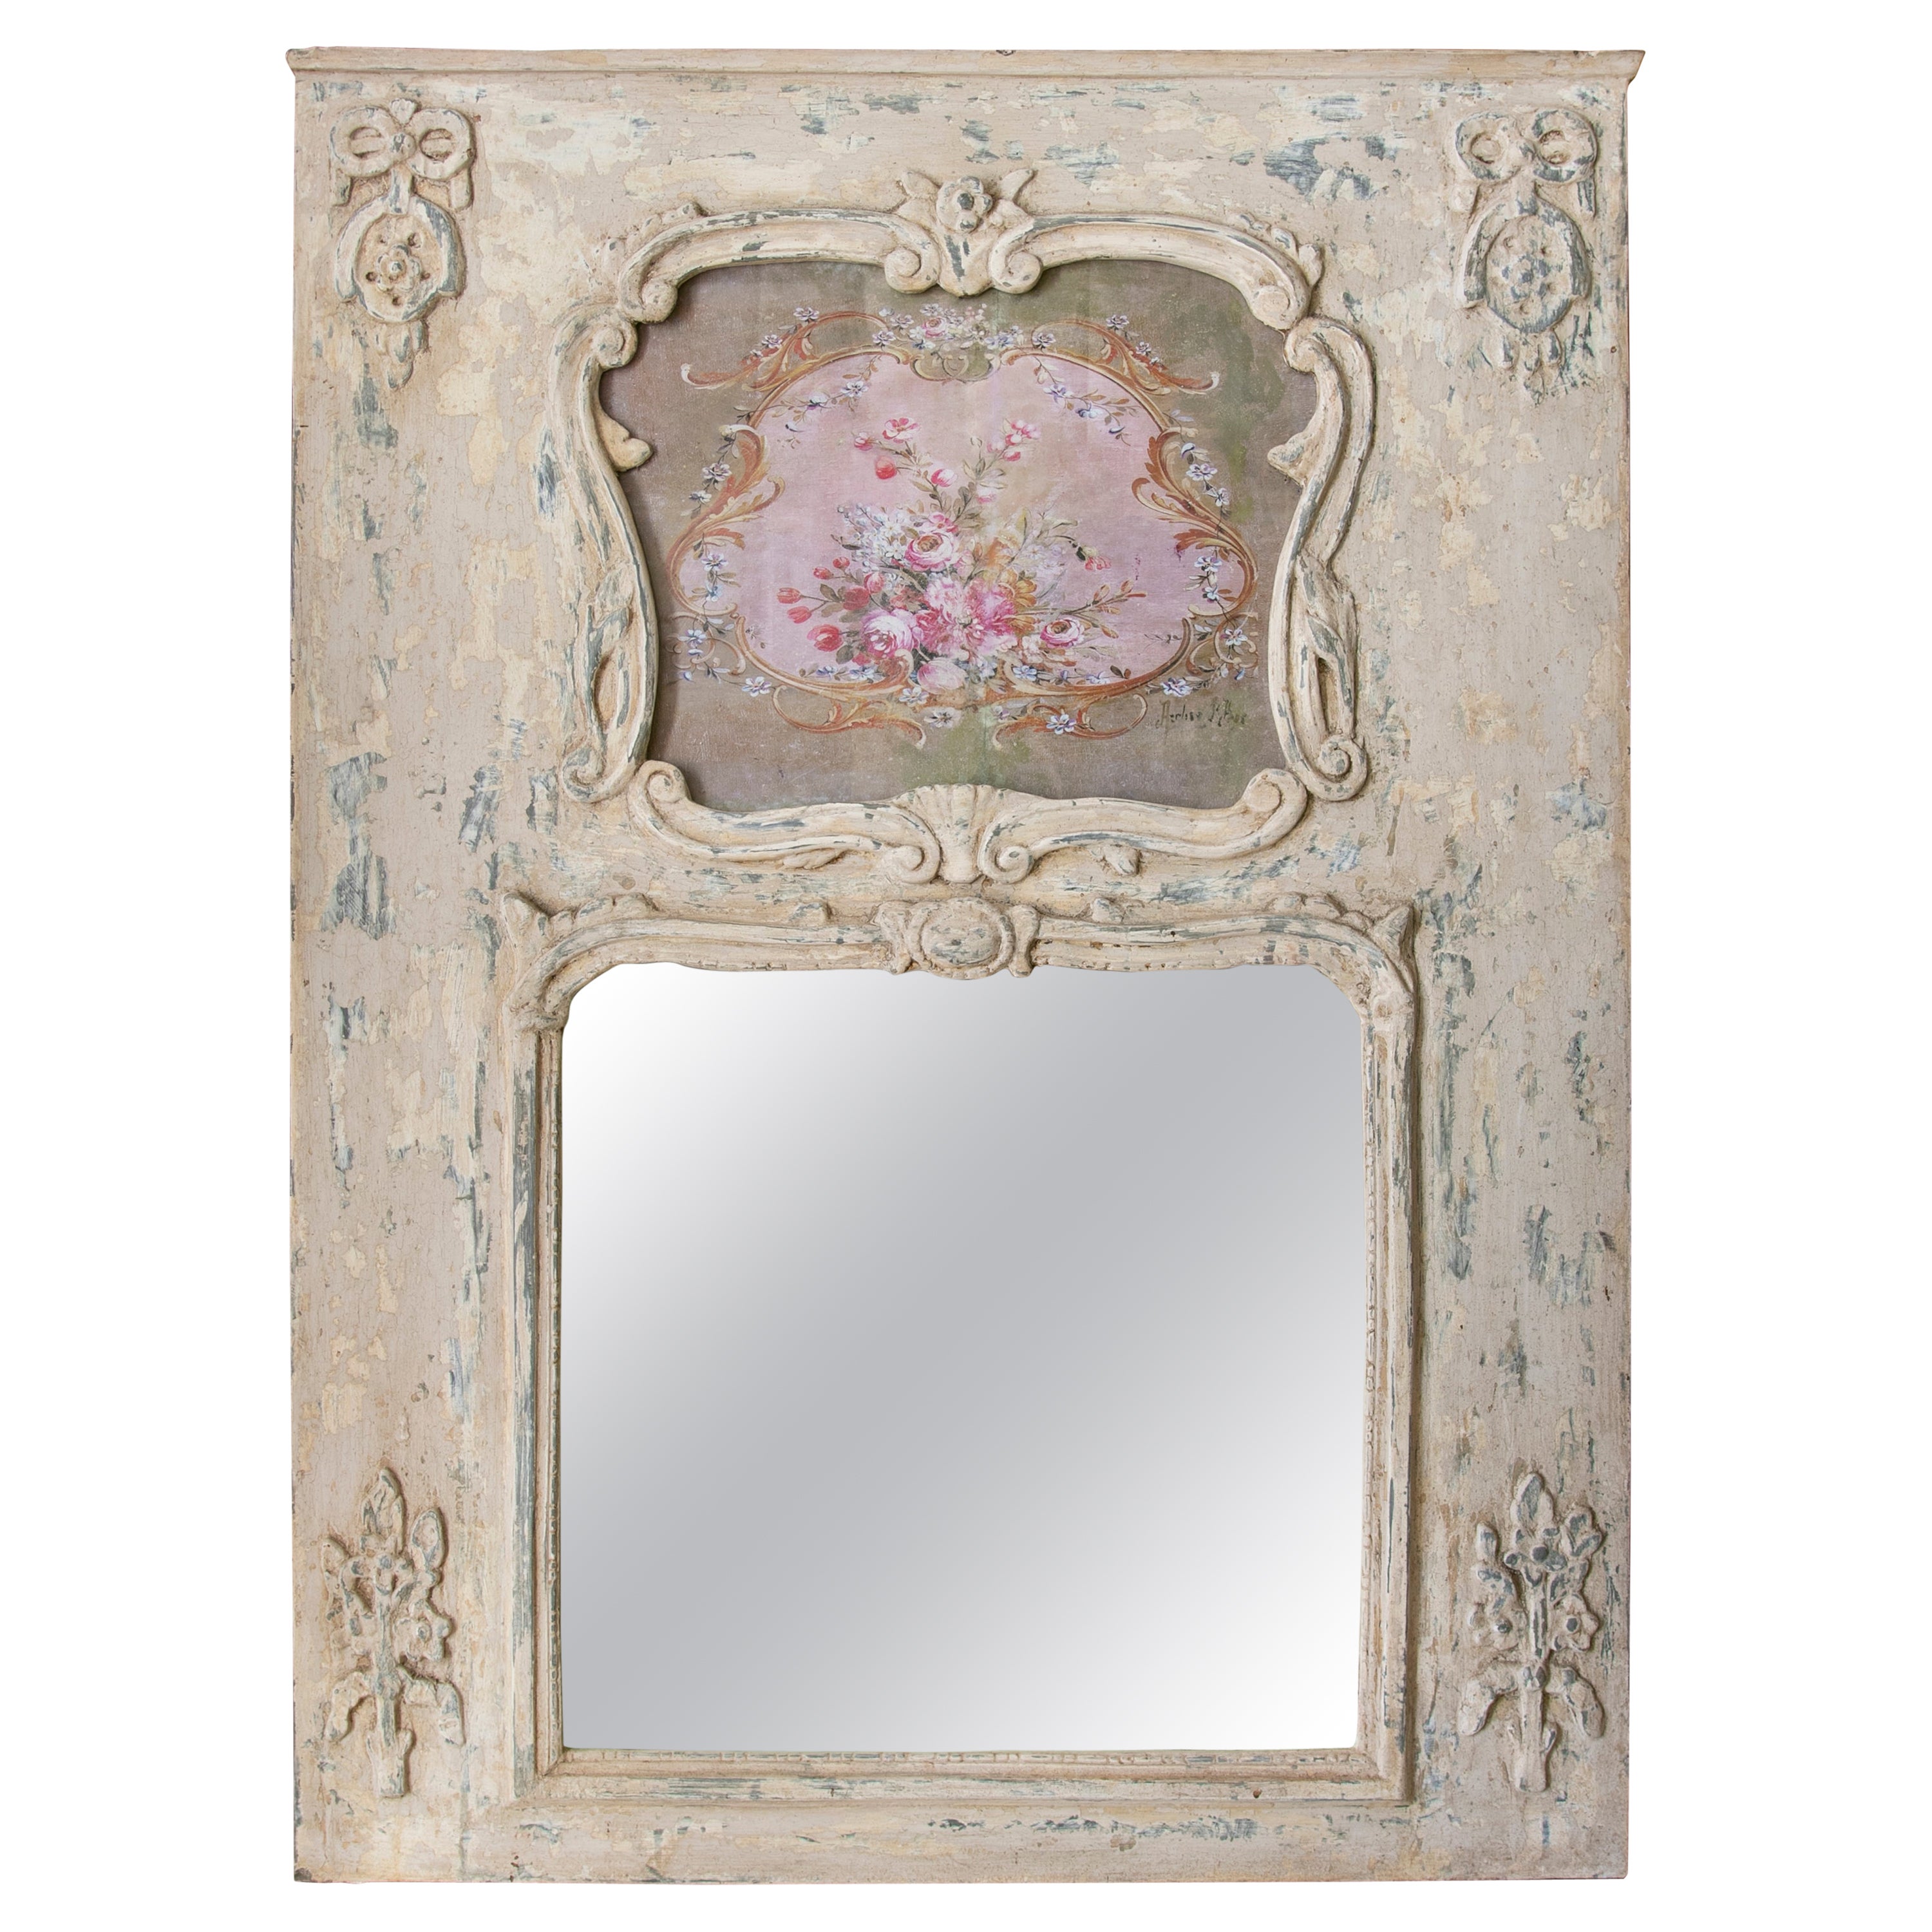 Hand-Carved and Polychromed Wooden Trumeau Wall Mirror